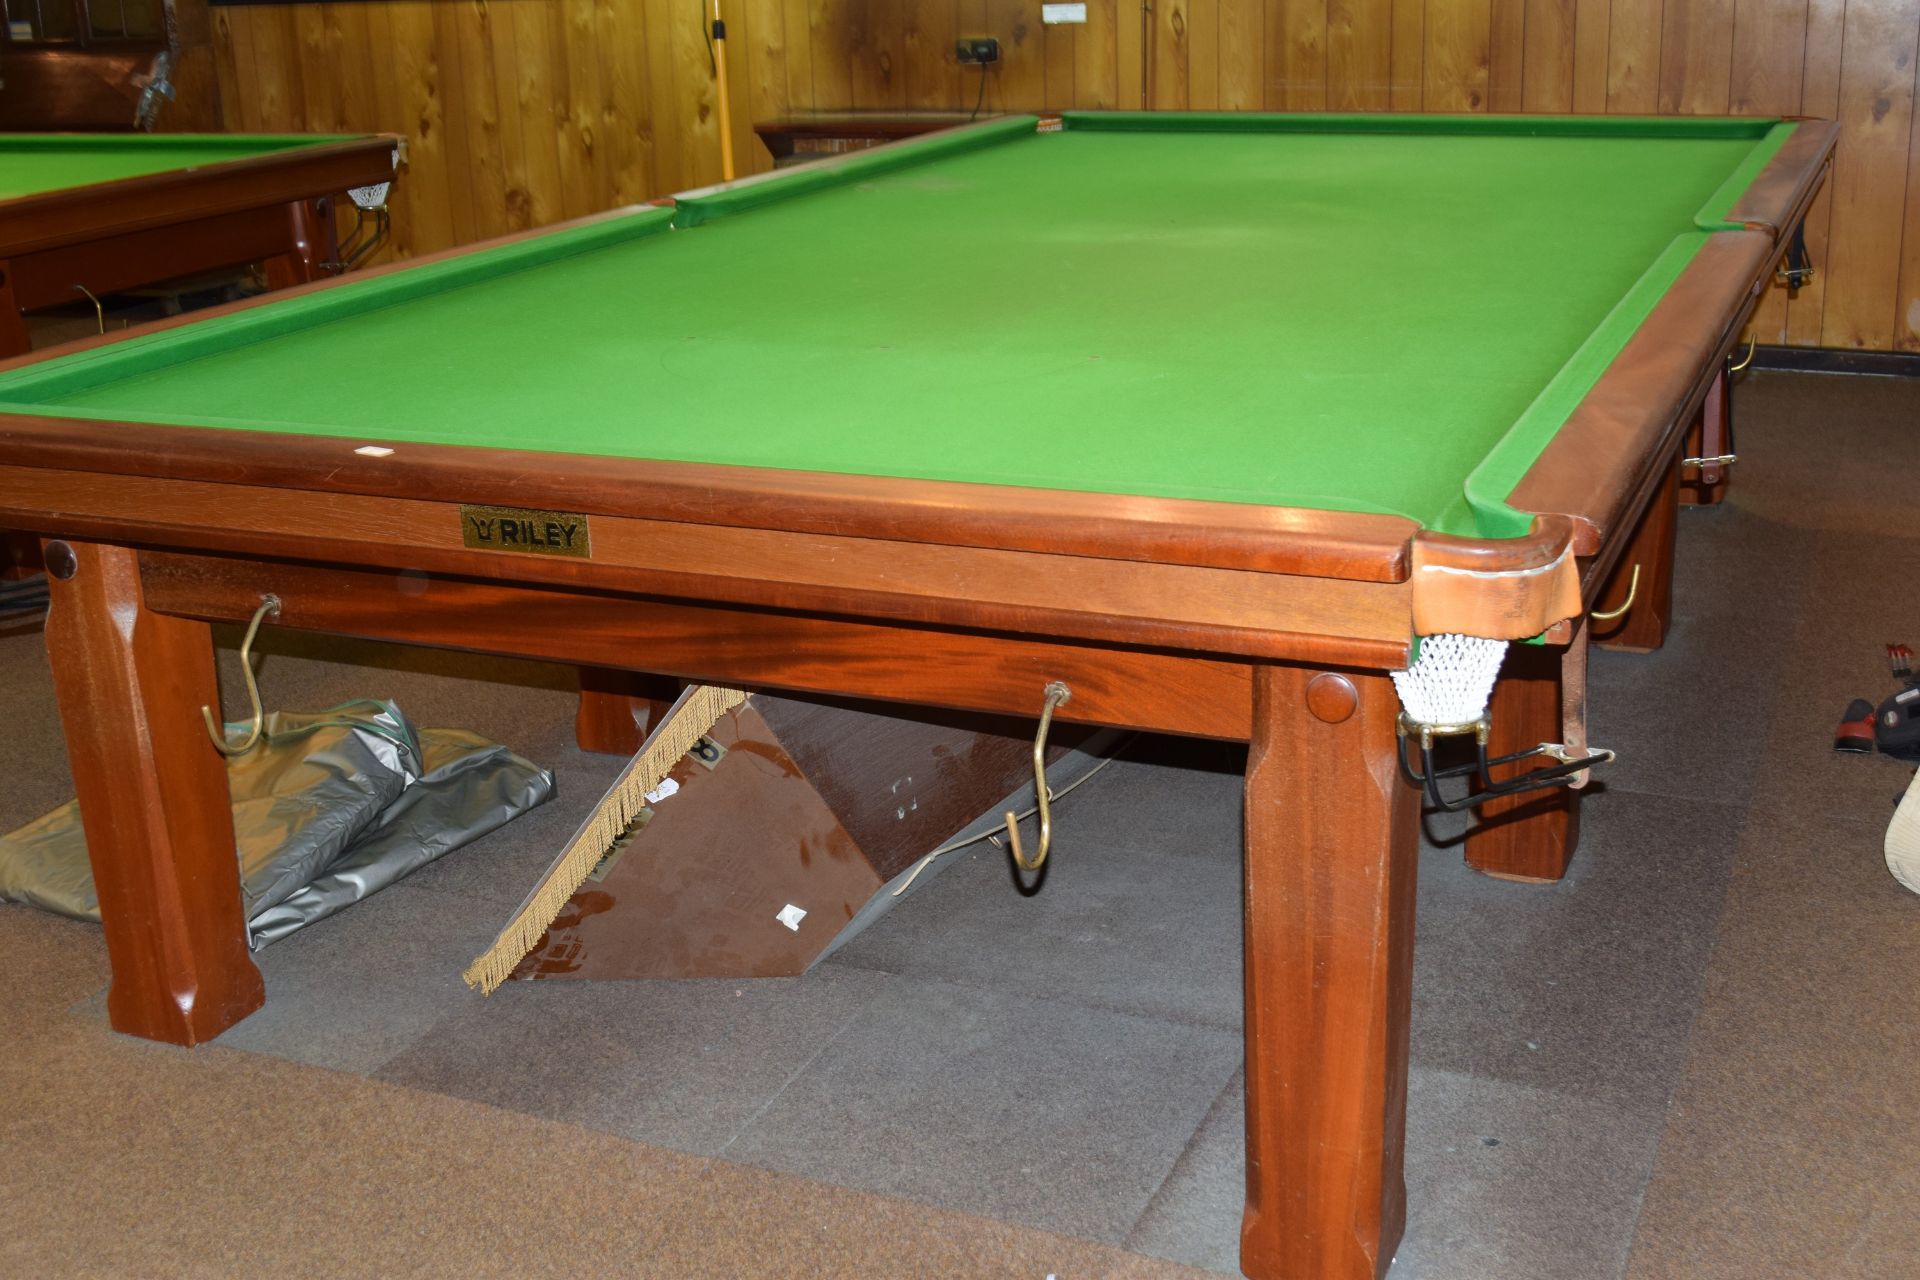 Riley full size snooker table